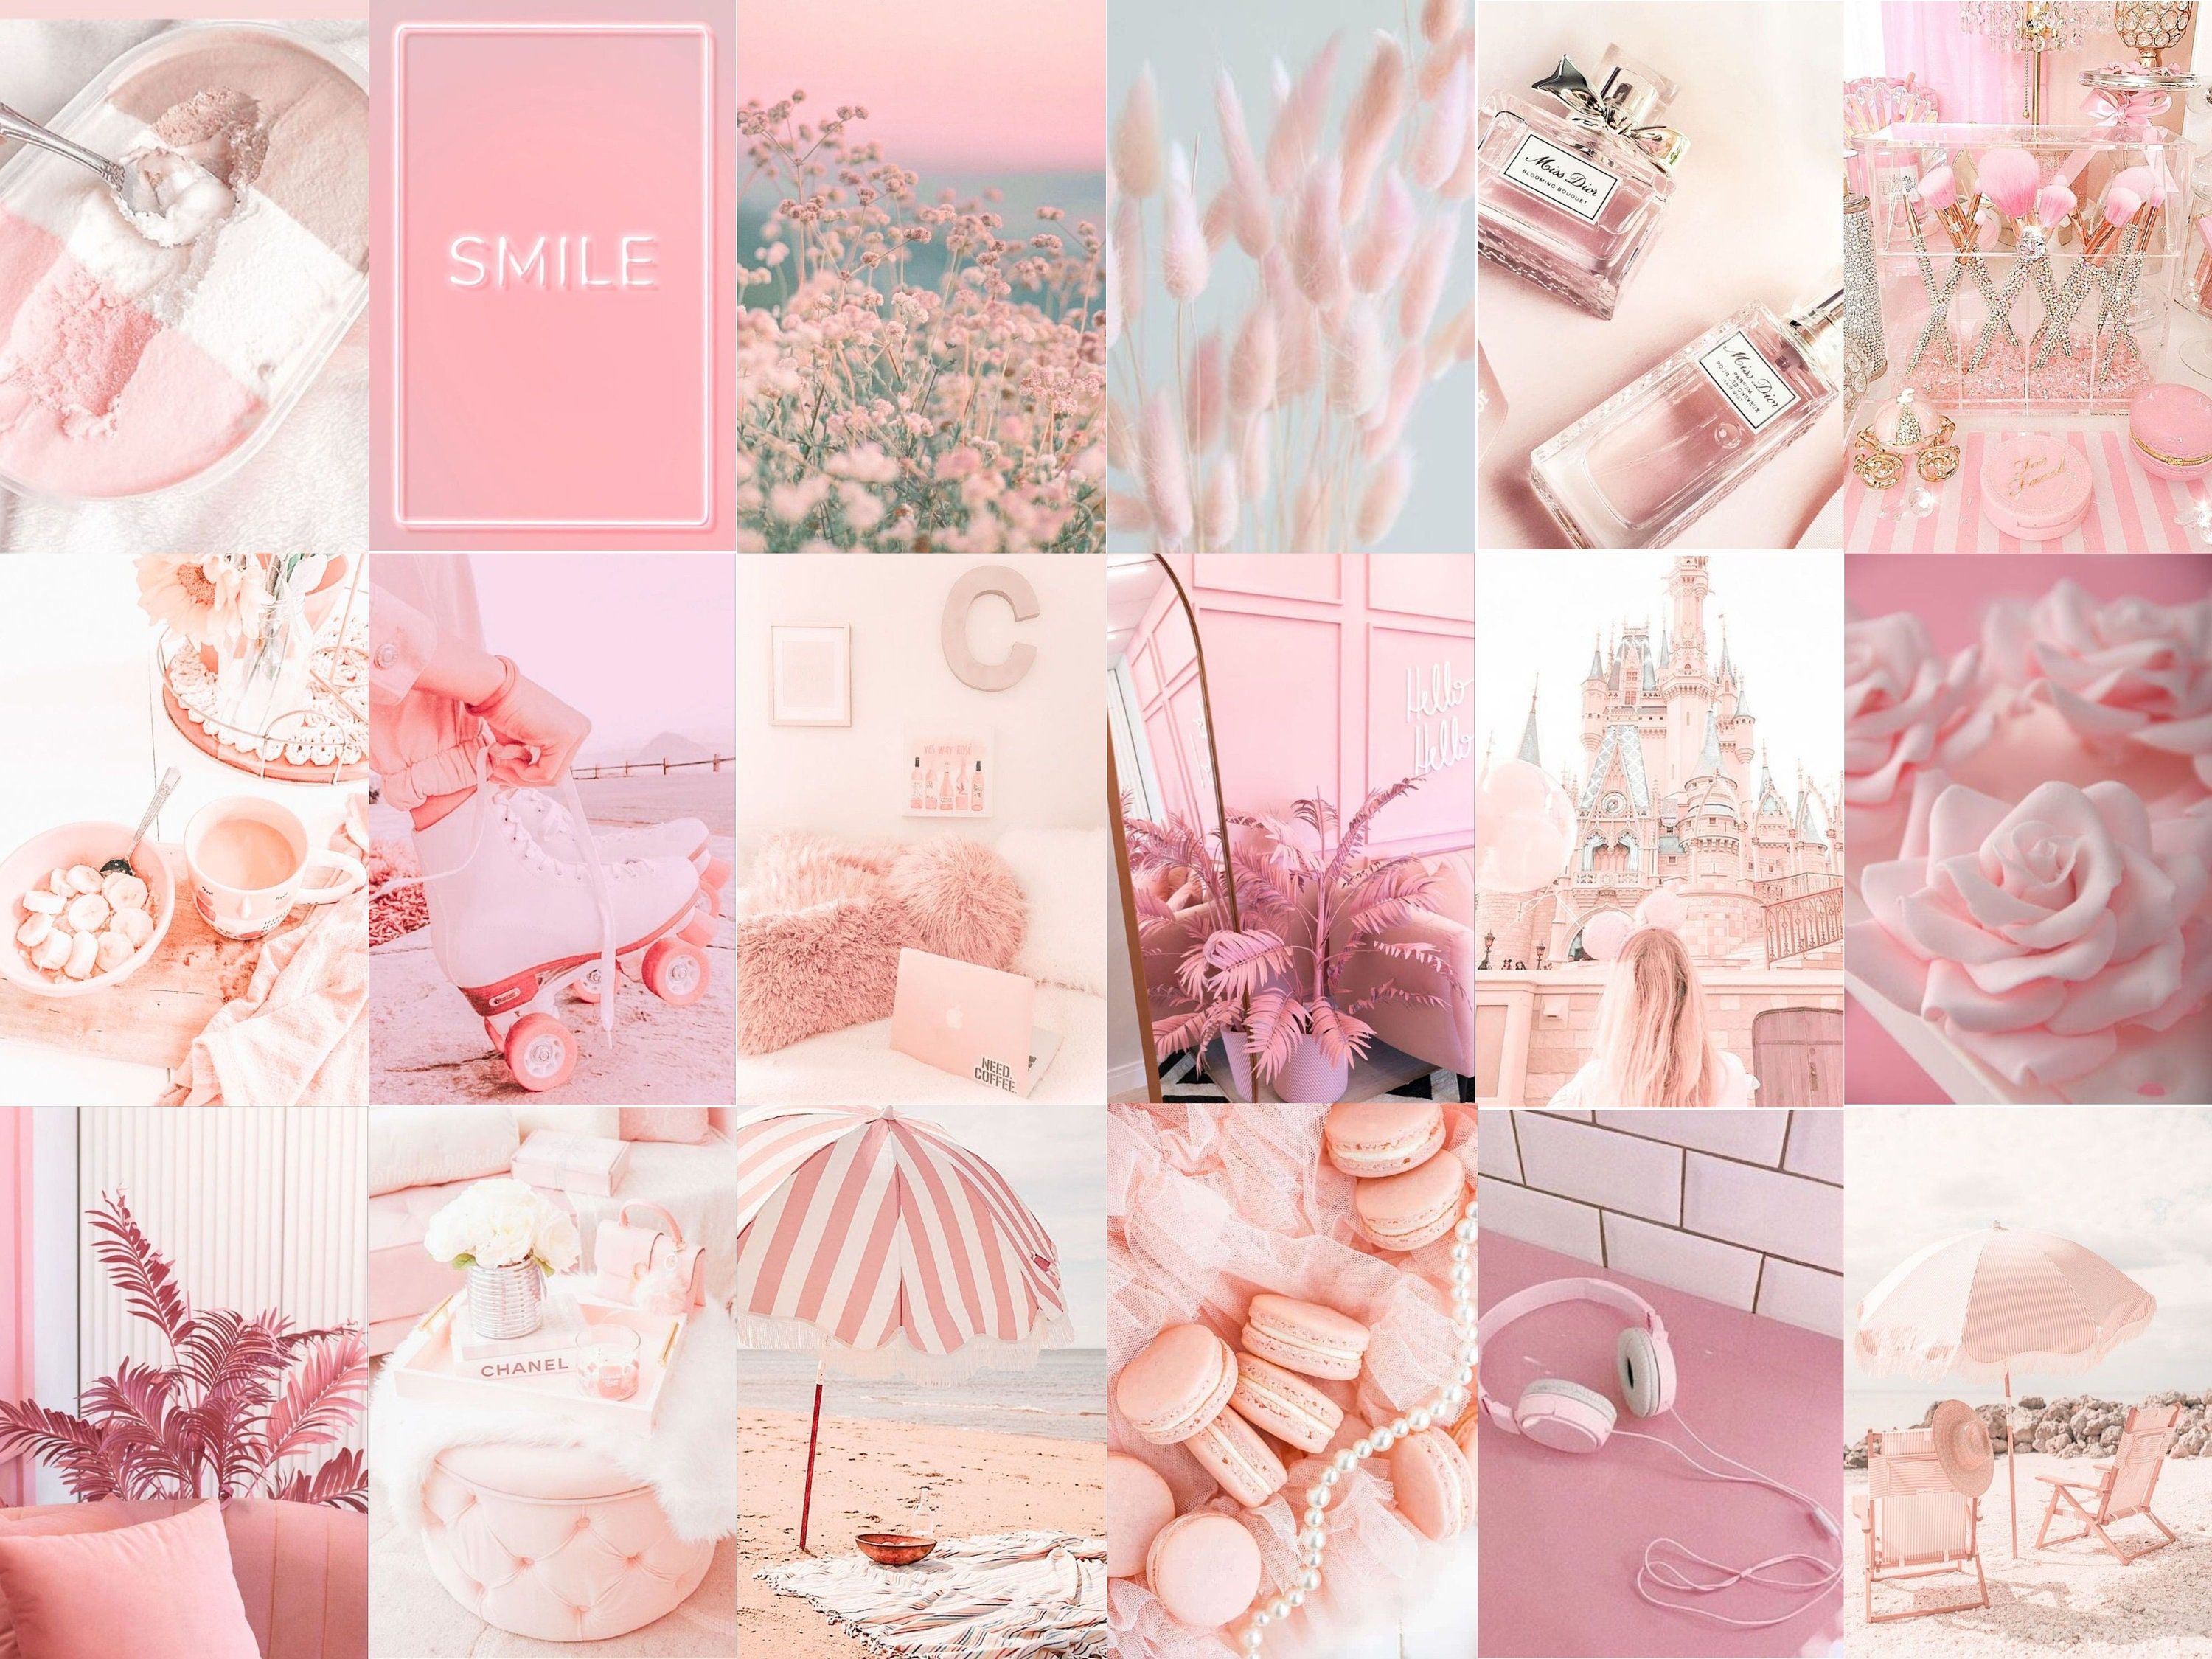 A collage of pink aesthetic pictures - Pink collage